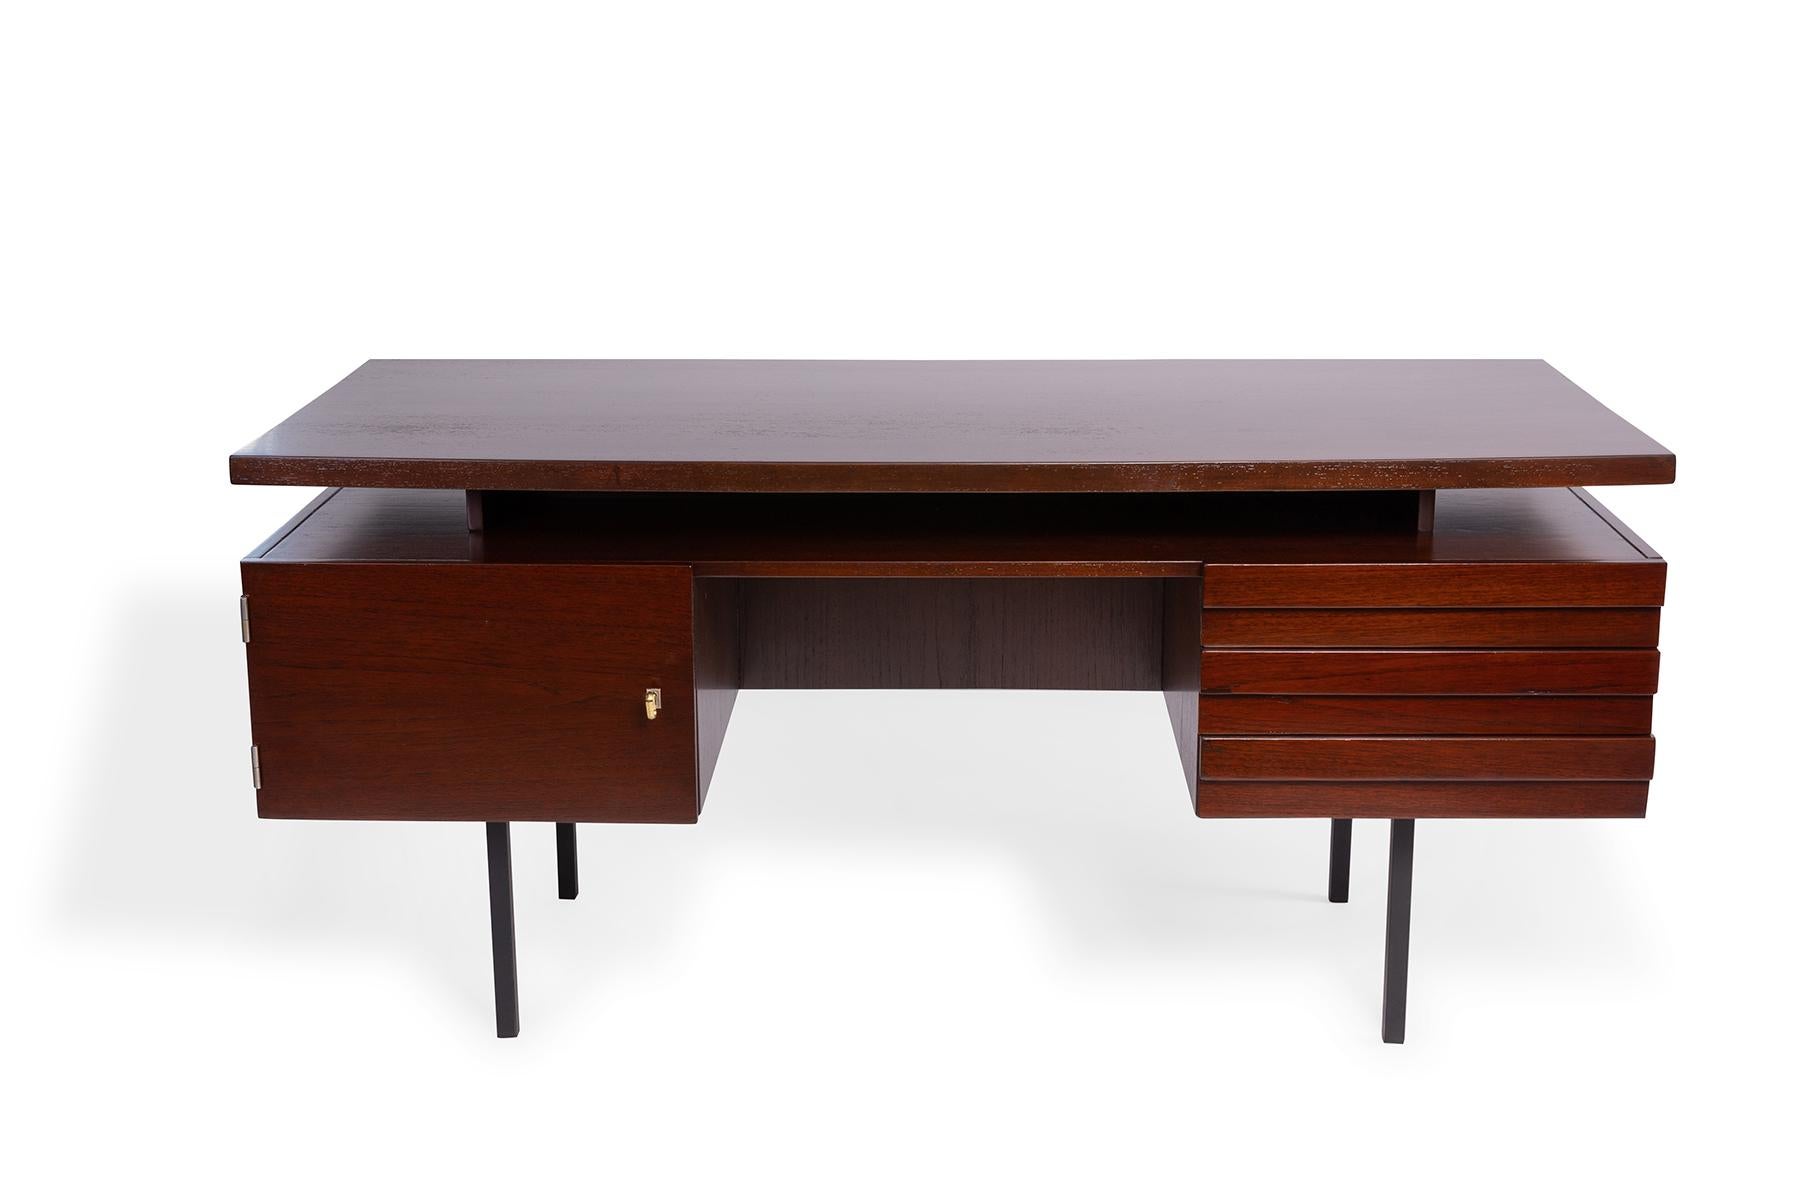 Executive desk from Denmark circa mid-1960s now available. This example has matte black iron legs, open back for additional storage, interior and exterior drawers and original brass key.